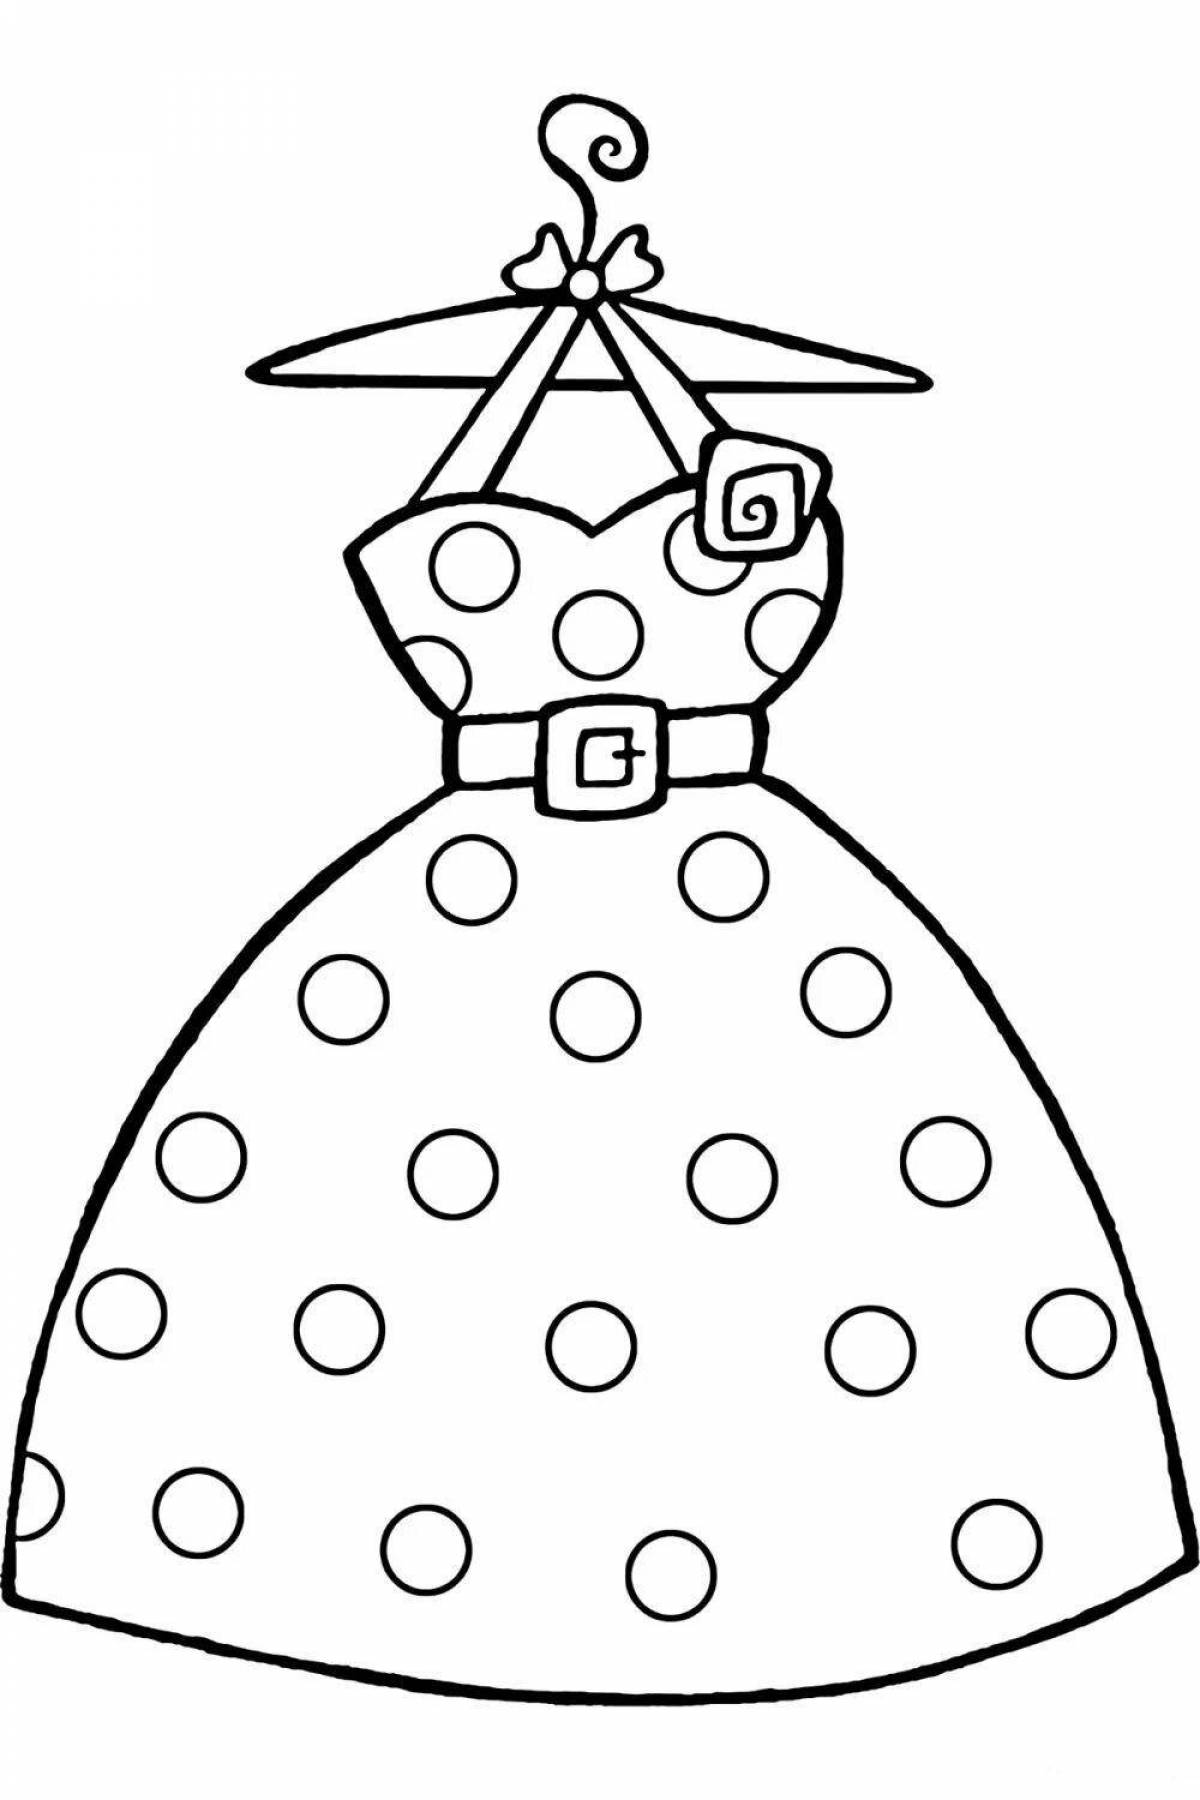 Funny sundress pattern coloring book for kids